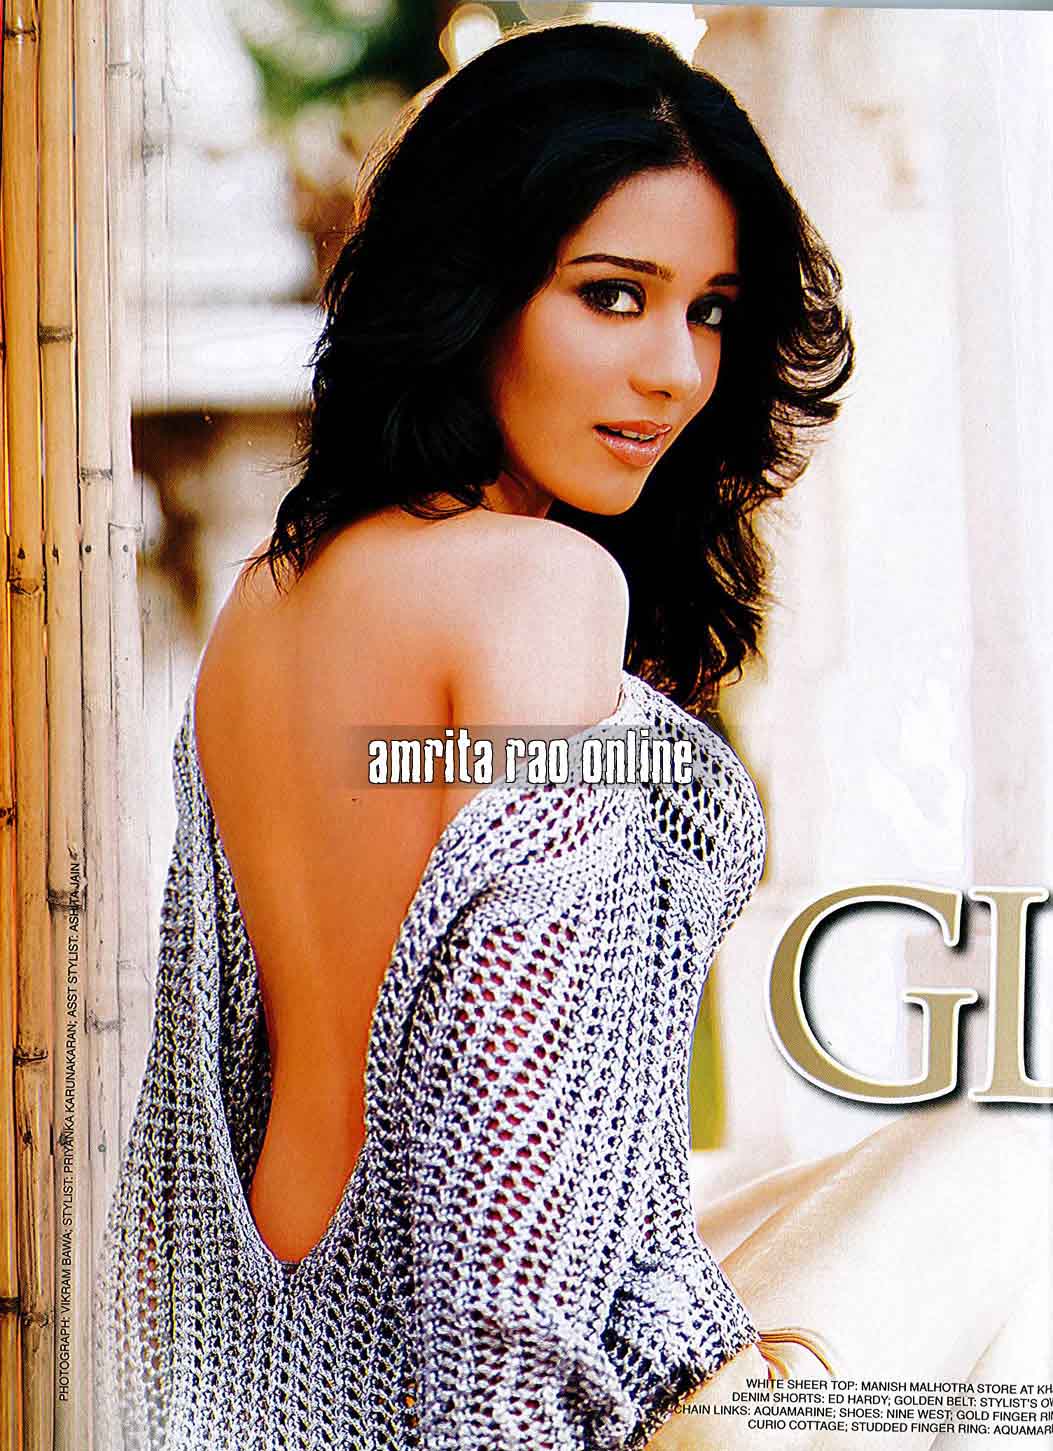 amrita rao latest hd wallpapers - All IN All Free